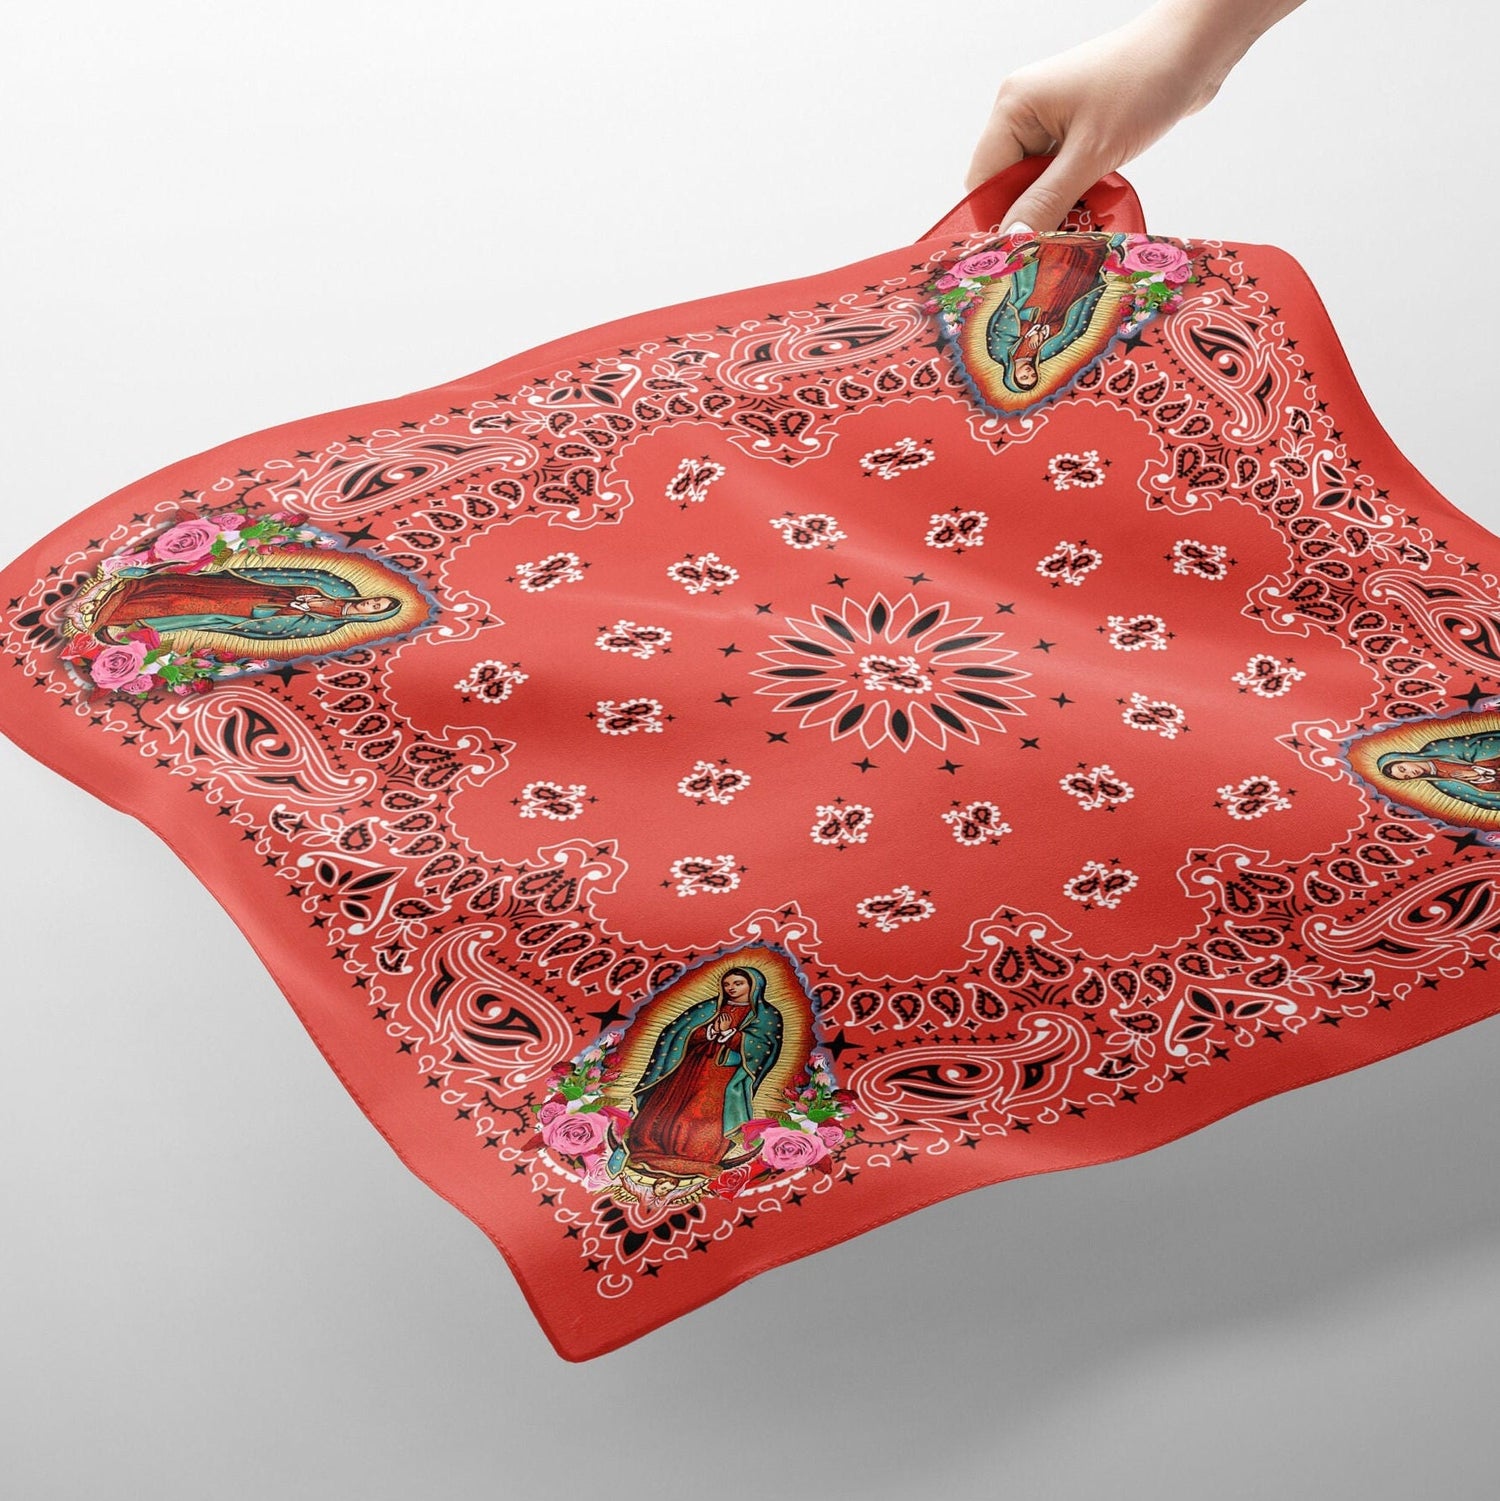 Virgin Mary, Our Lady of Guadalupe Paisley Red Bandana, Head Wrap, Altar Cloth or Scarf